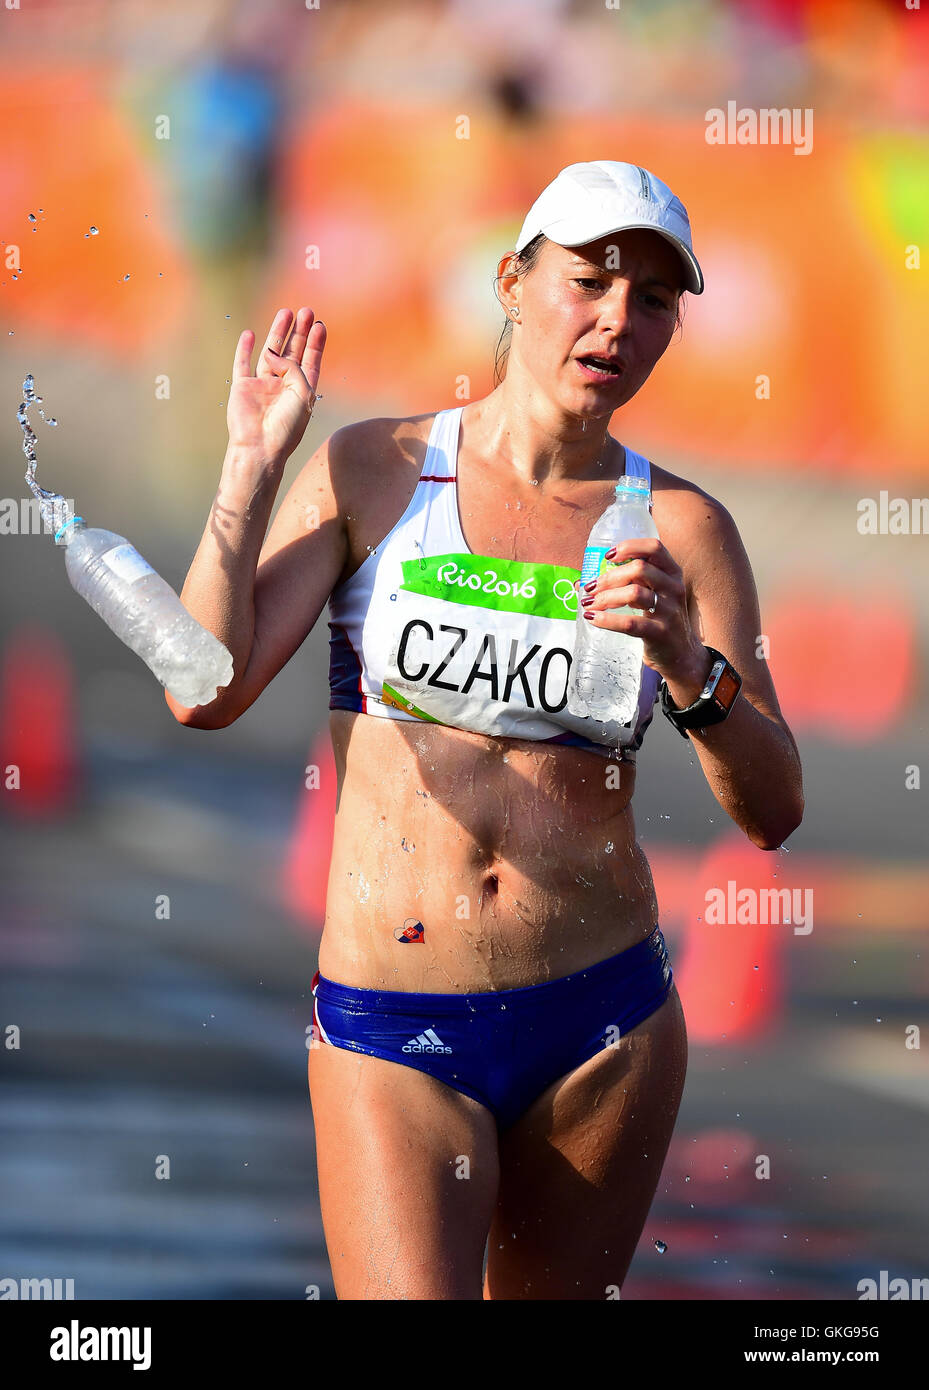 Rio de Janeiro, Brazil. 19th August, 2016. Maria Czakova of Slovakia during the womens 20km race walk on Day 14 of the 2016 Rio Olympics at Pontal on August 19, 2016 in Rio de Janeiro, Brazil. (Photo by Roger Sedres/Gallo Images) Credit:  Roger Sedres/Alamy Live News Stock Photo